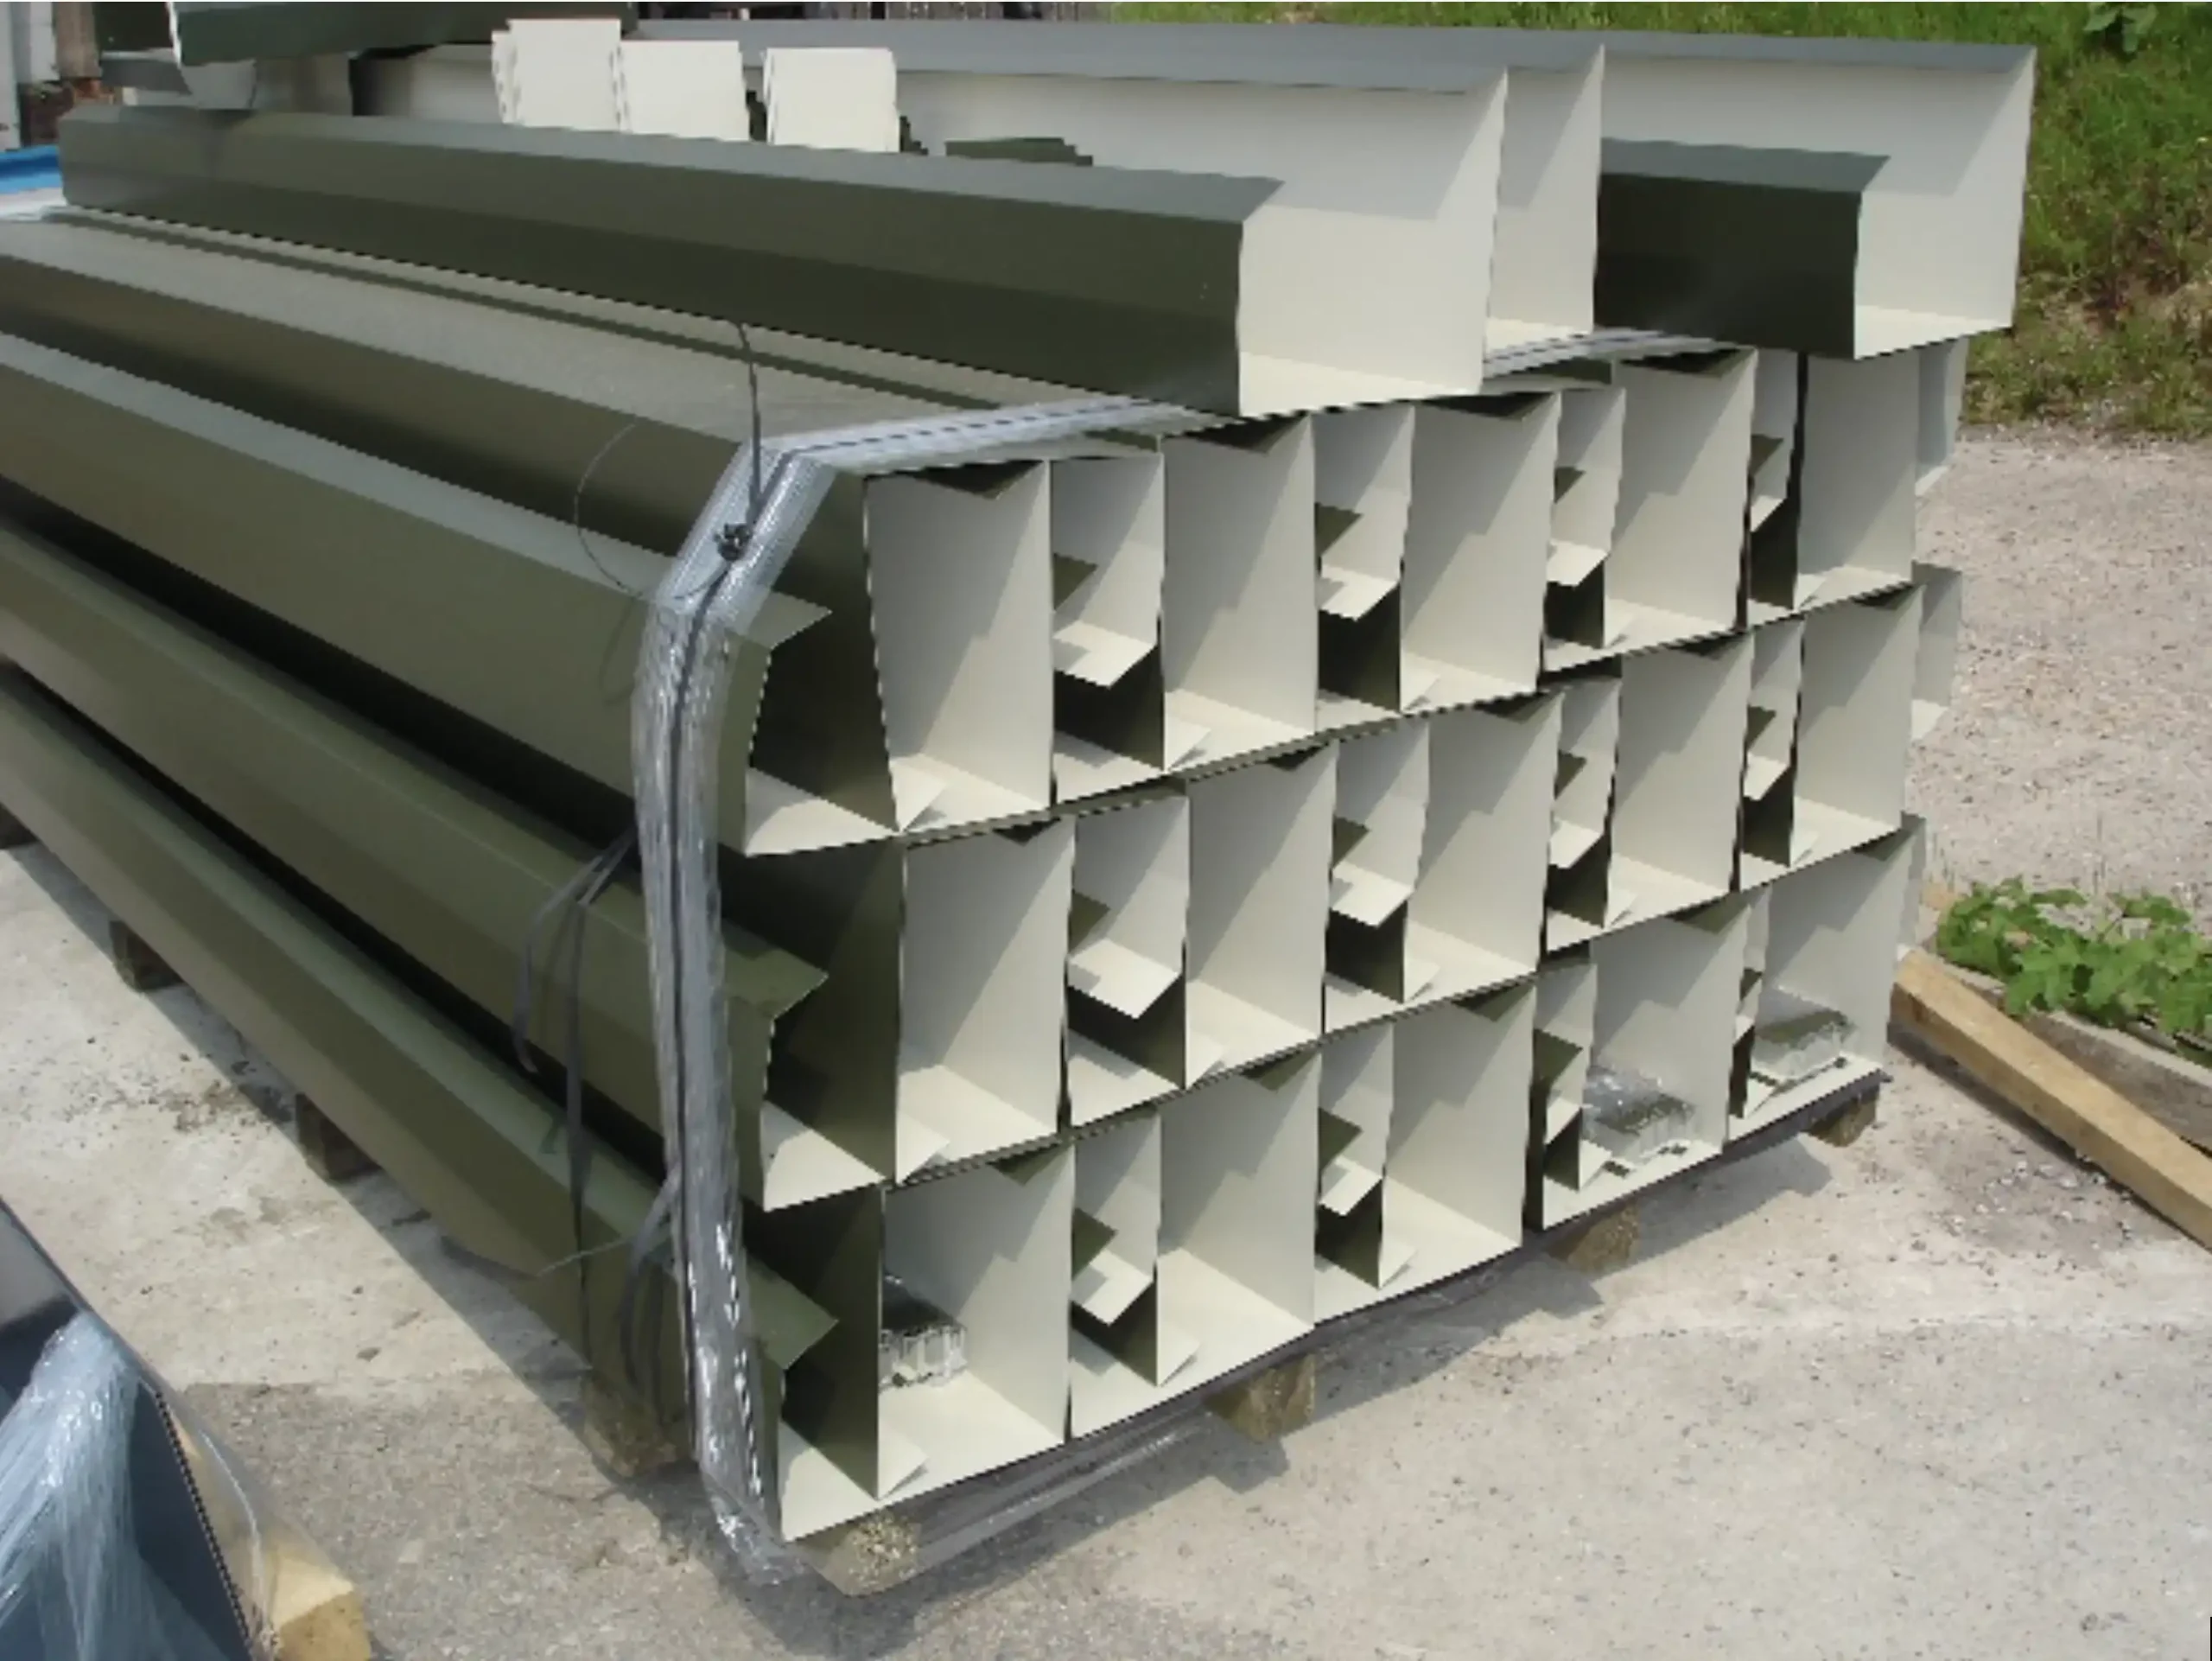 SEFAB's Range of Gutters for Various Applications